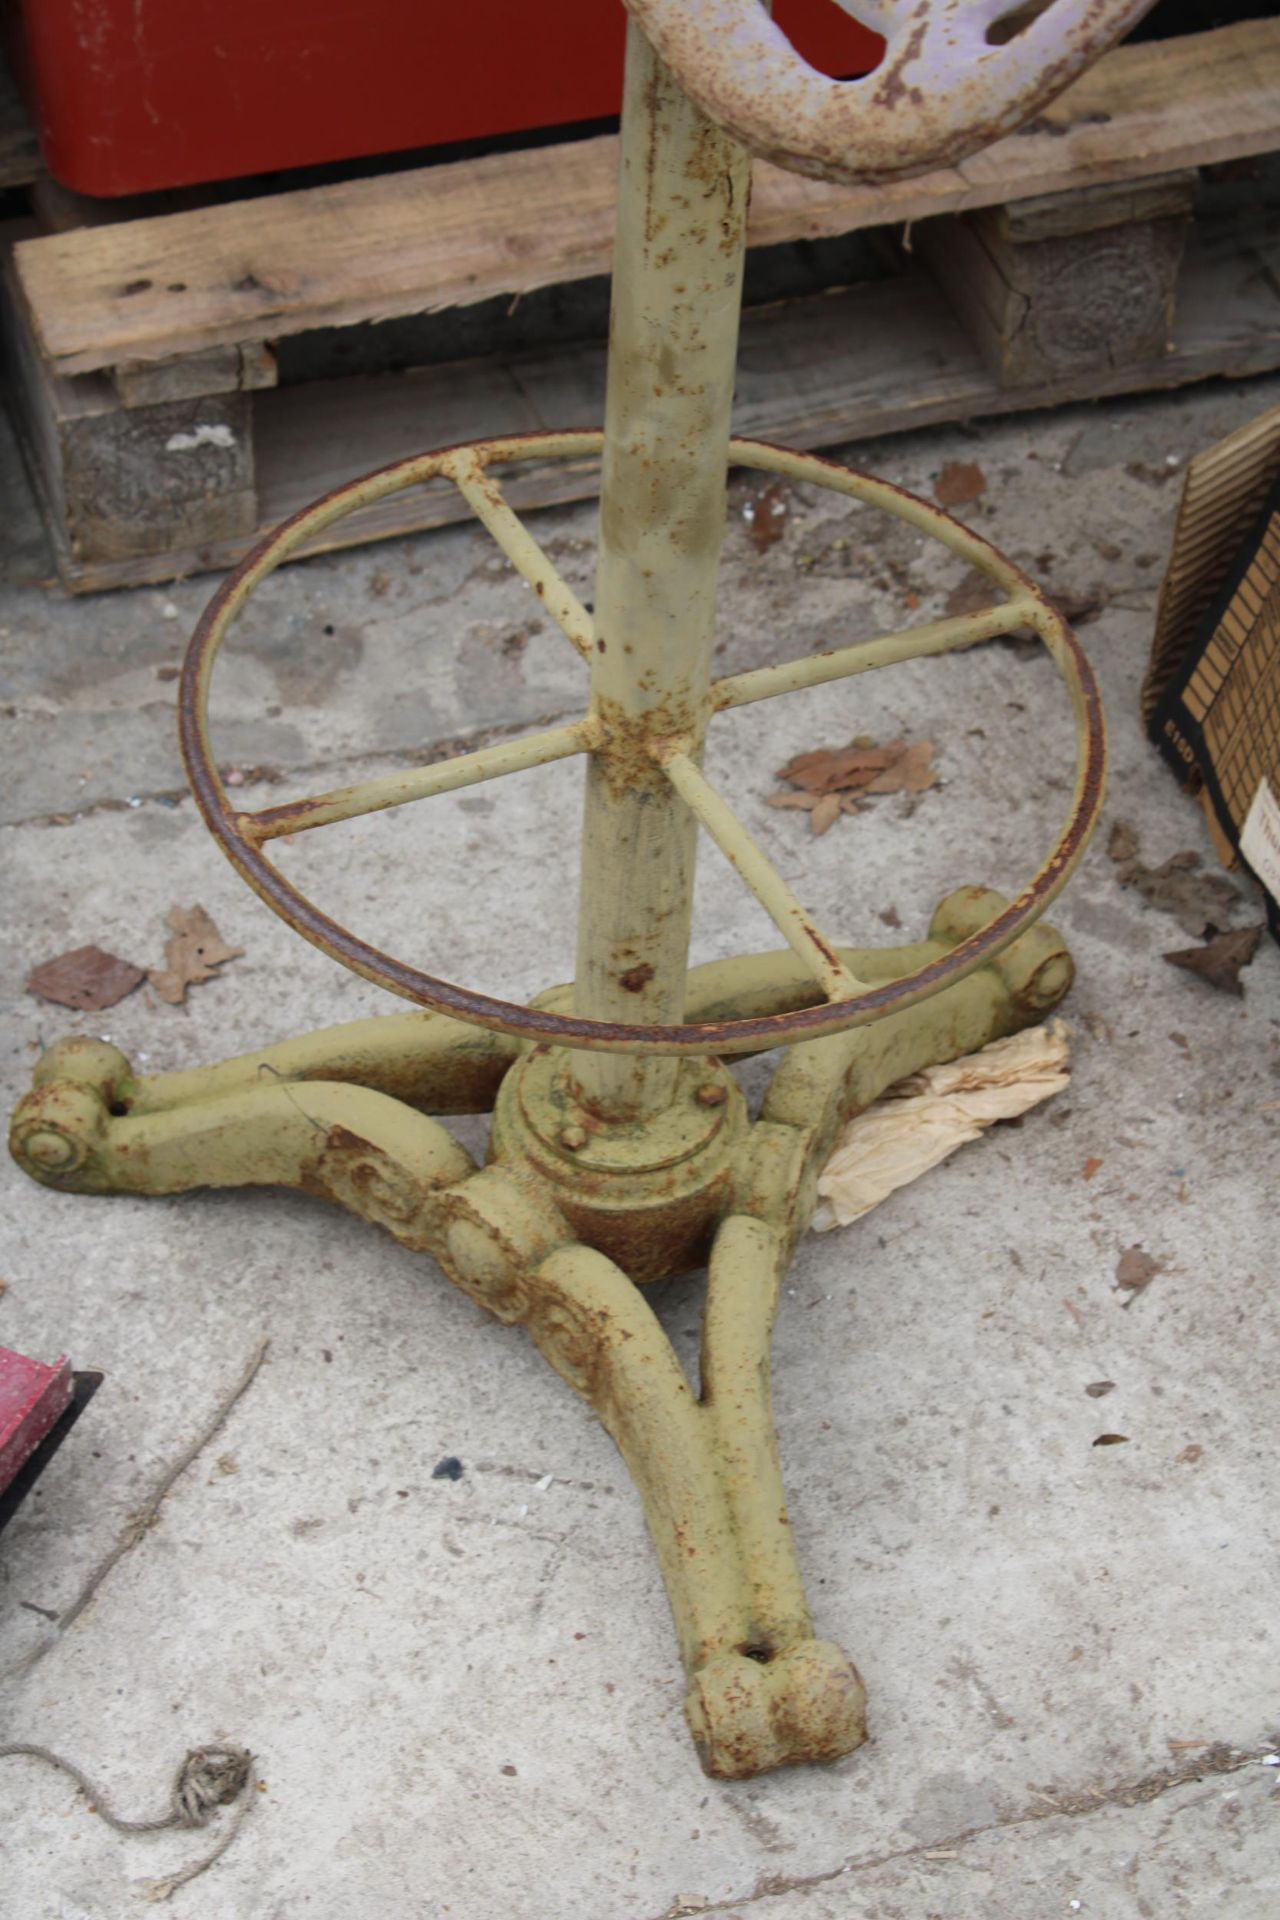 A VINTAGE IMPLEMENT SEAT STOOL - Image 2 of 3